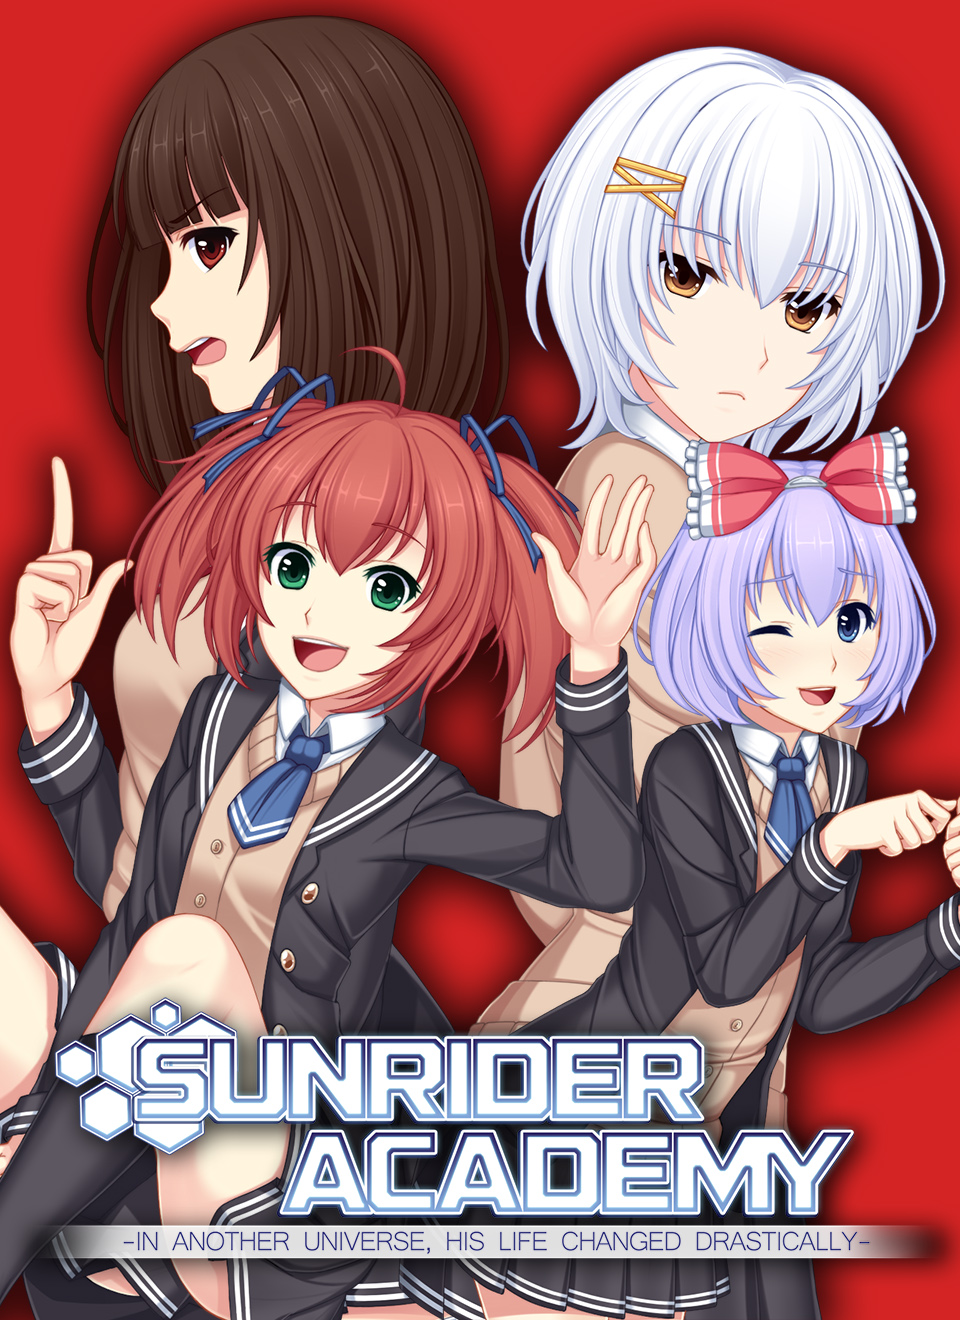 sunrider academy pc cover - O Sunrider Academy In Another Universe, His Life Changed Drastically